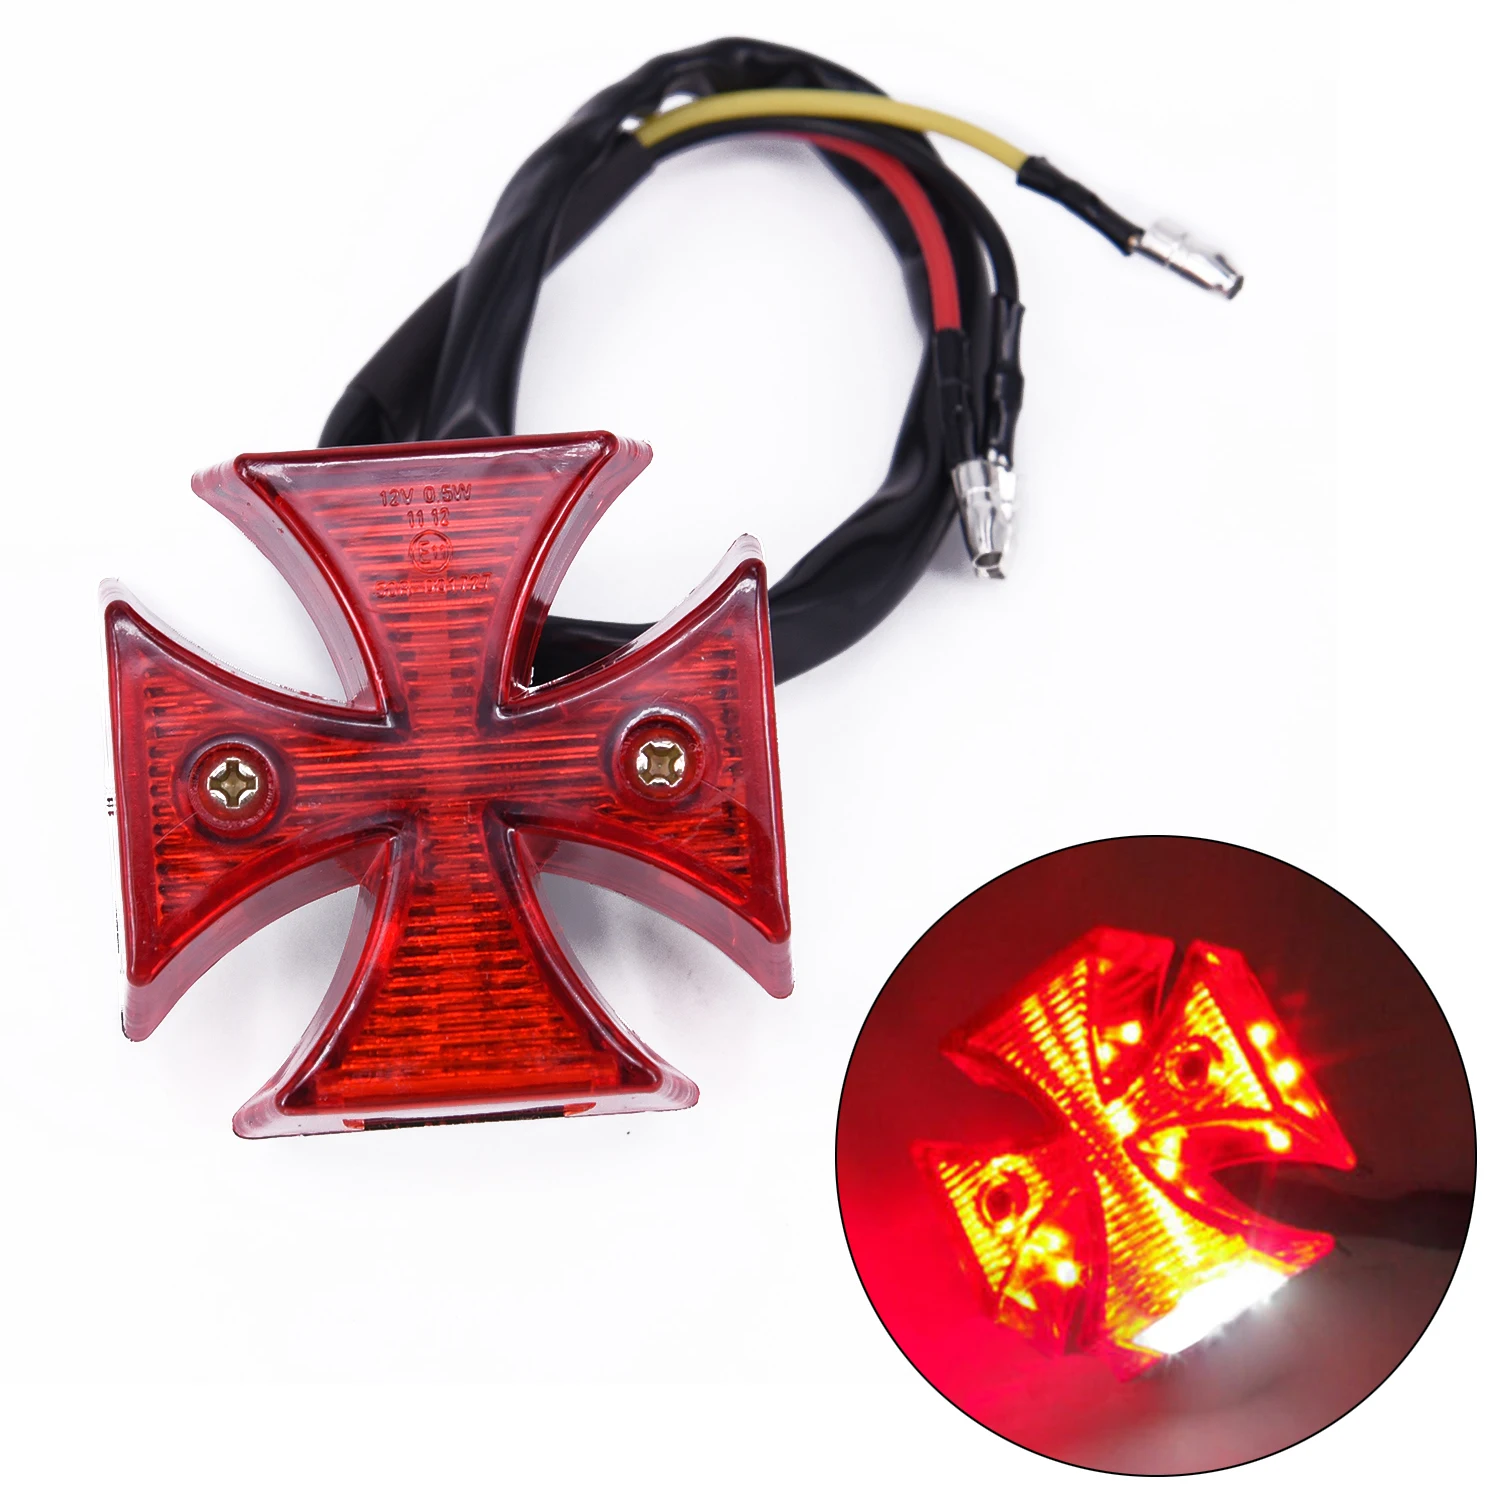 

1pc Motorcycle Tail Light Rear Tail Brake Lamp License Plate Light Cross LED ABS Surround With Red Lens For Bike Dirt Bike Quad